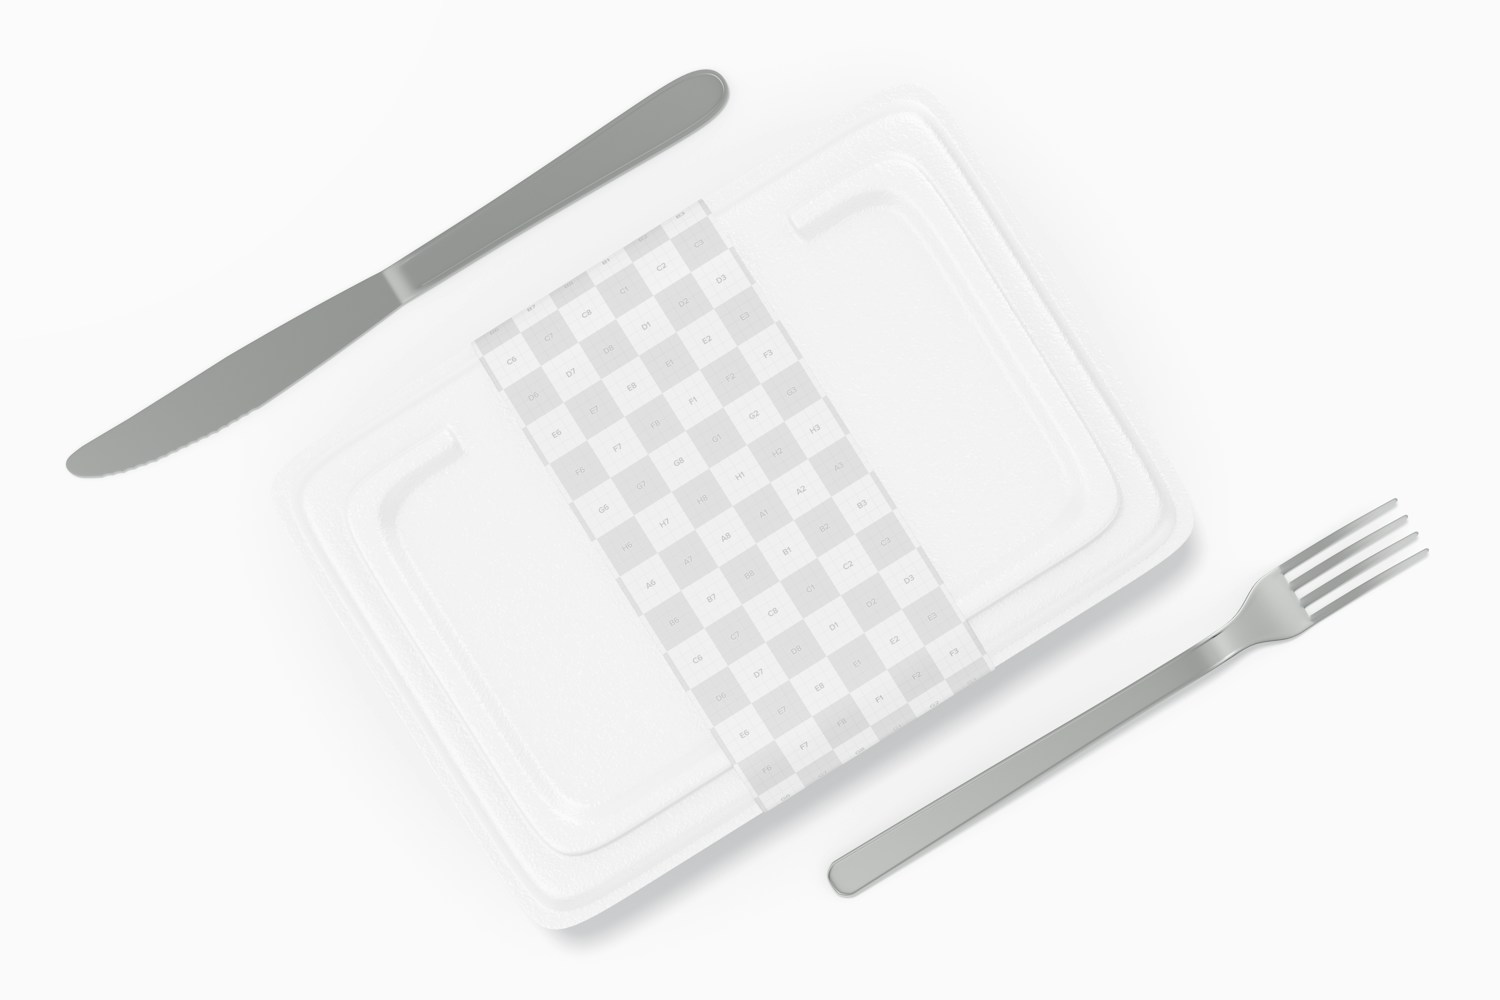 Biodegradable Food Containers Mockup, Top View